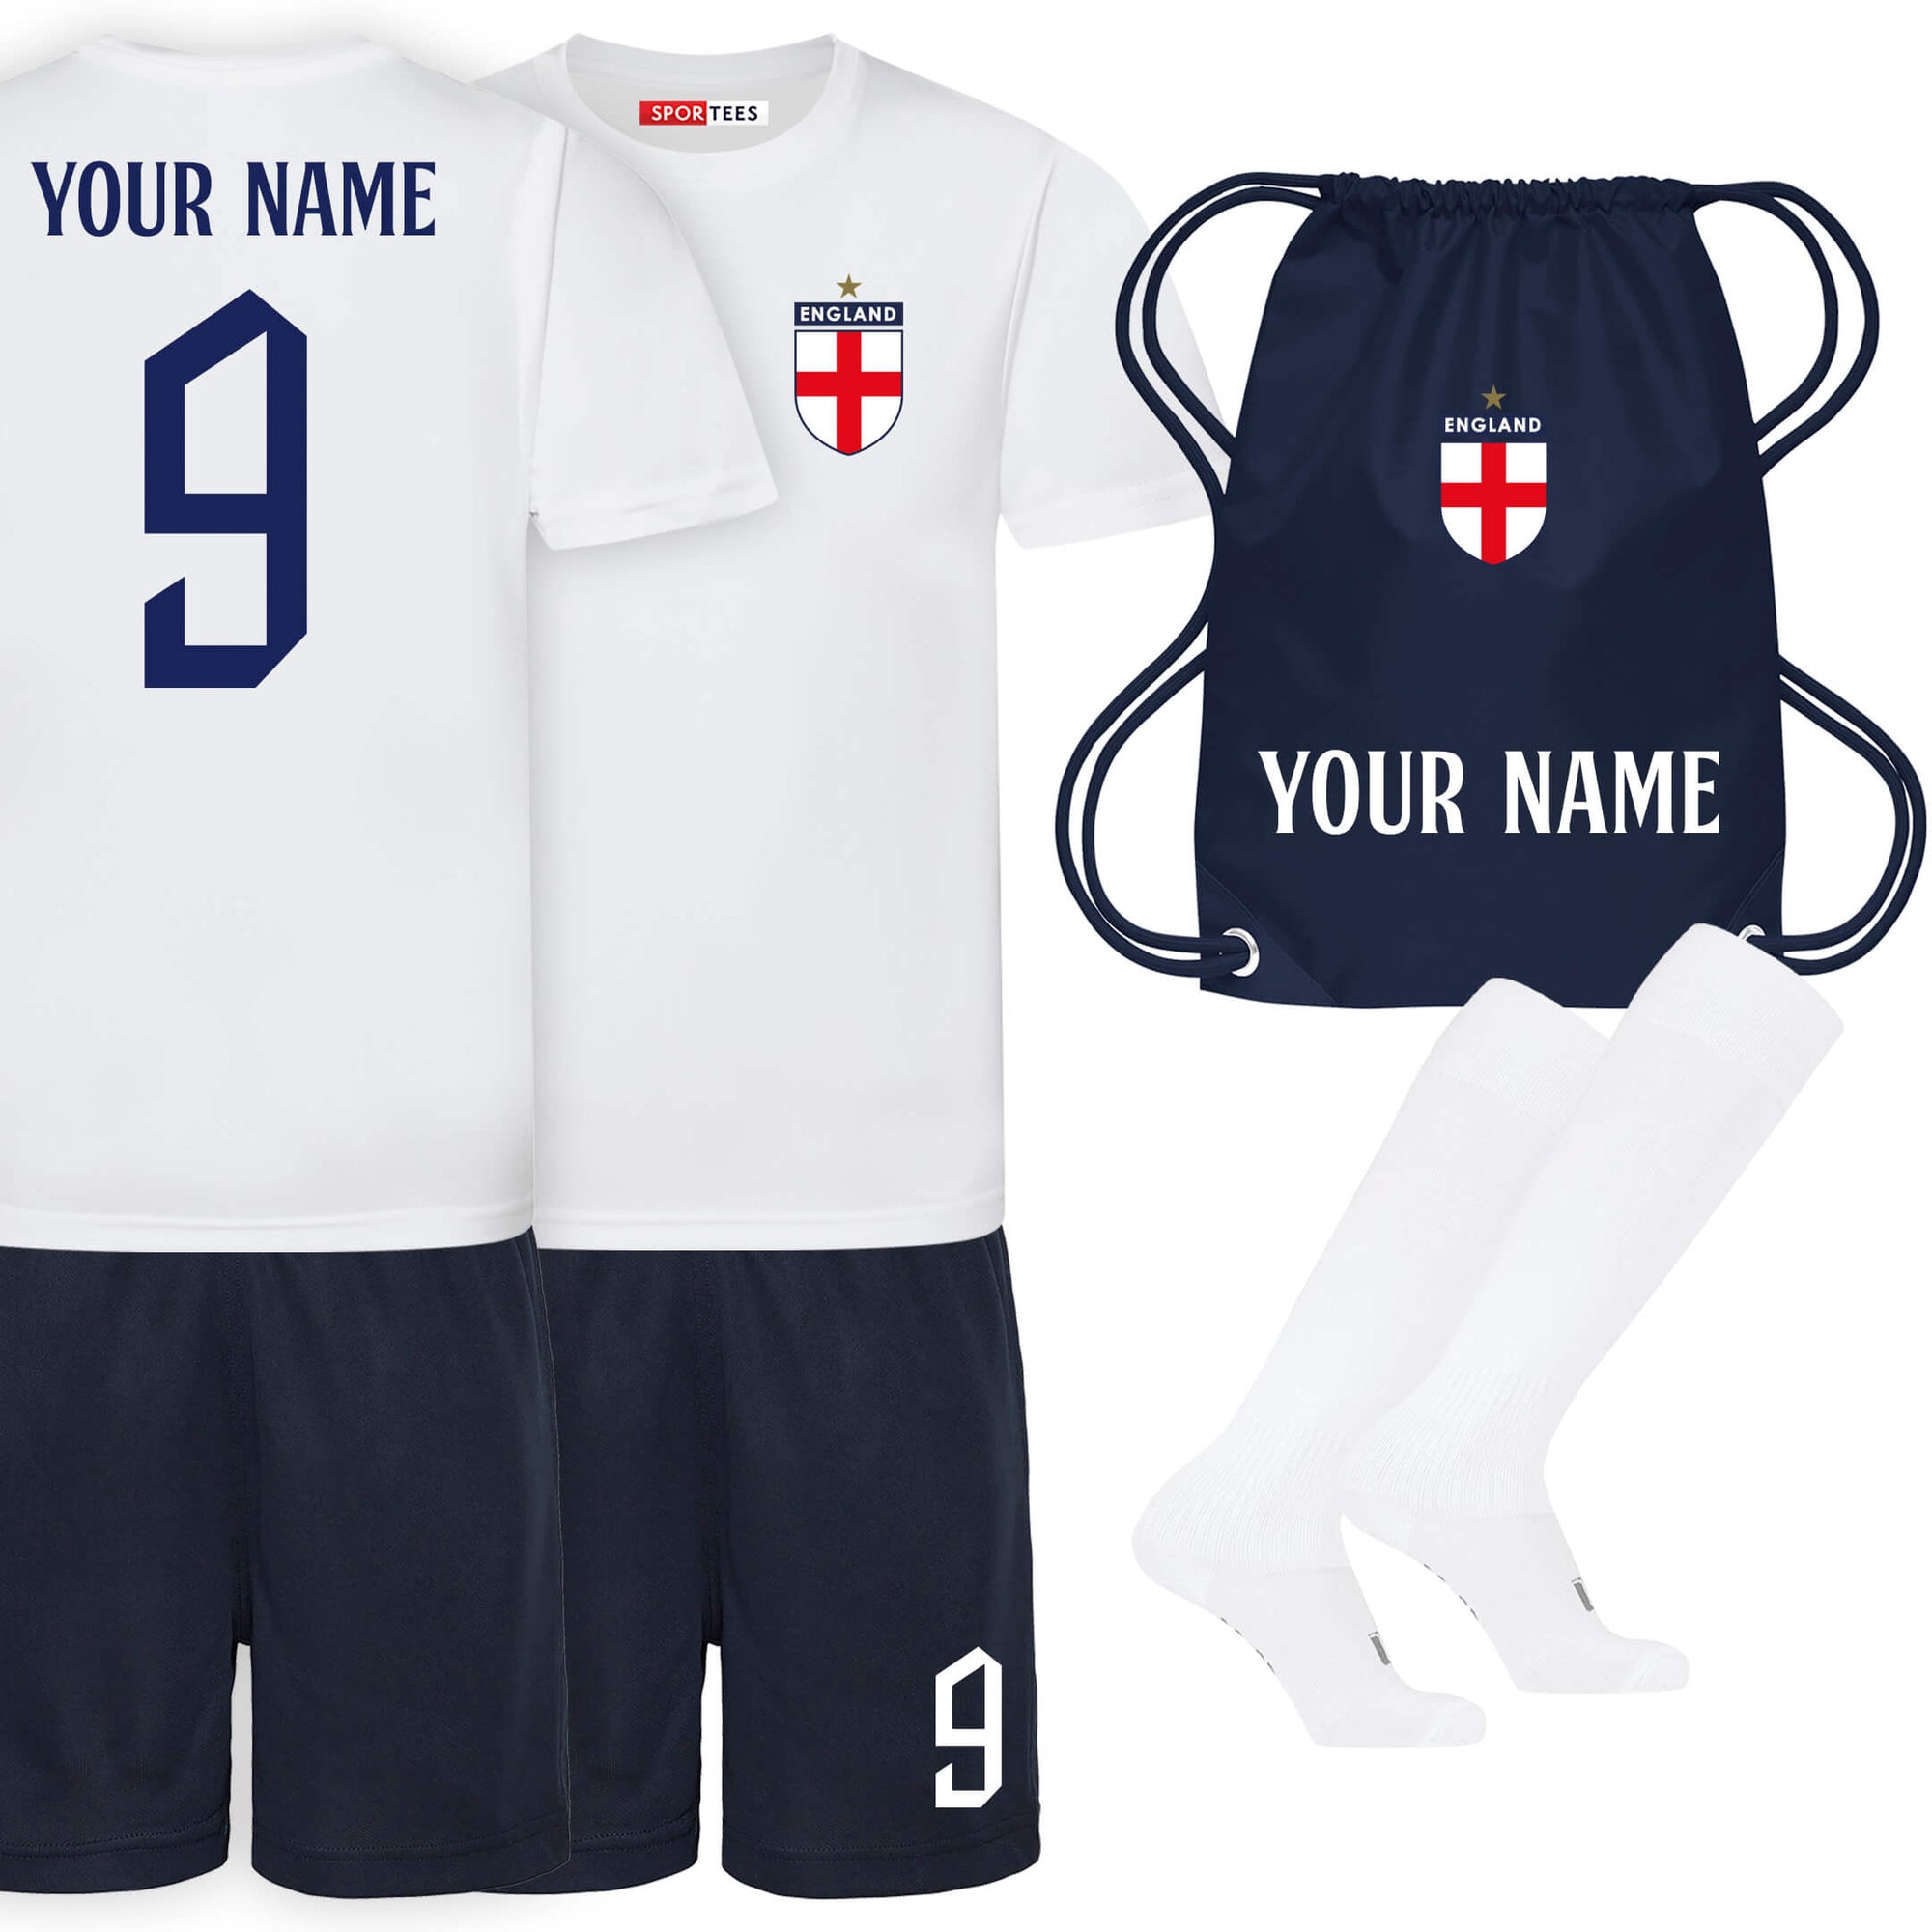 Personalised England Cup Style White & Navy Bundle With Socks & Bag